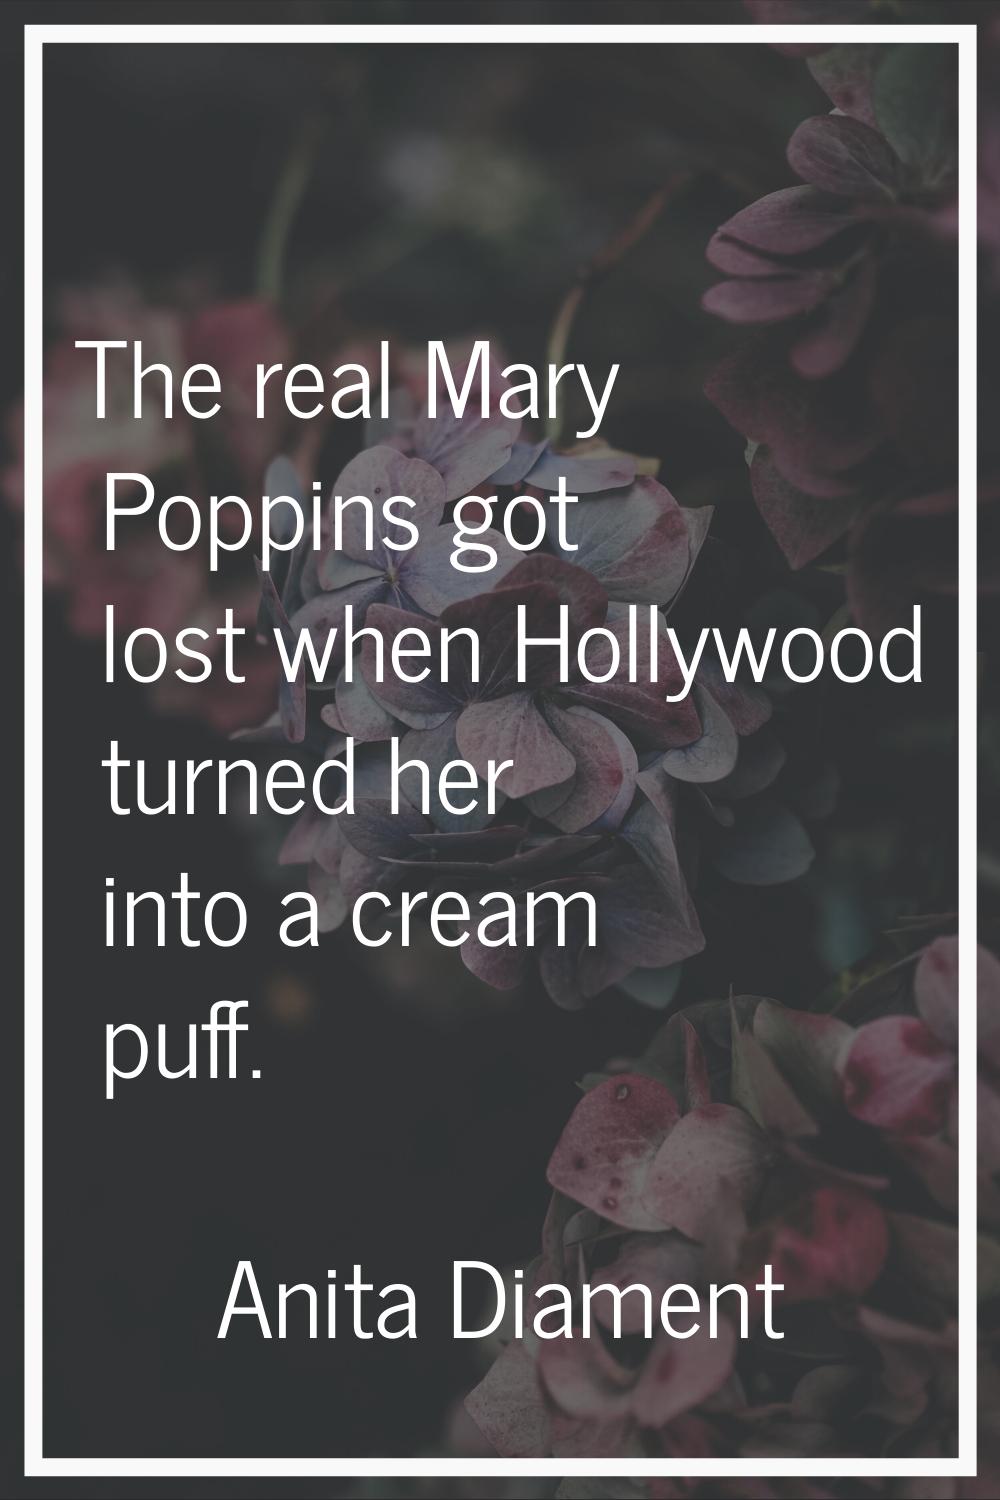 The real Mary Poppins got lost when Hollywood turned her into a cream puff.